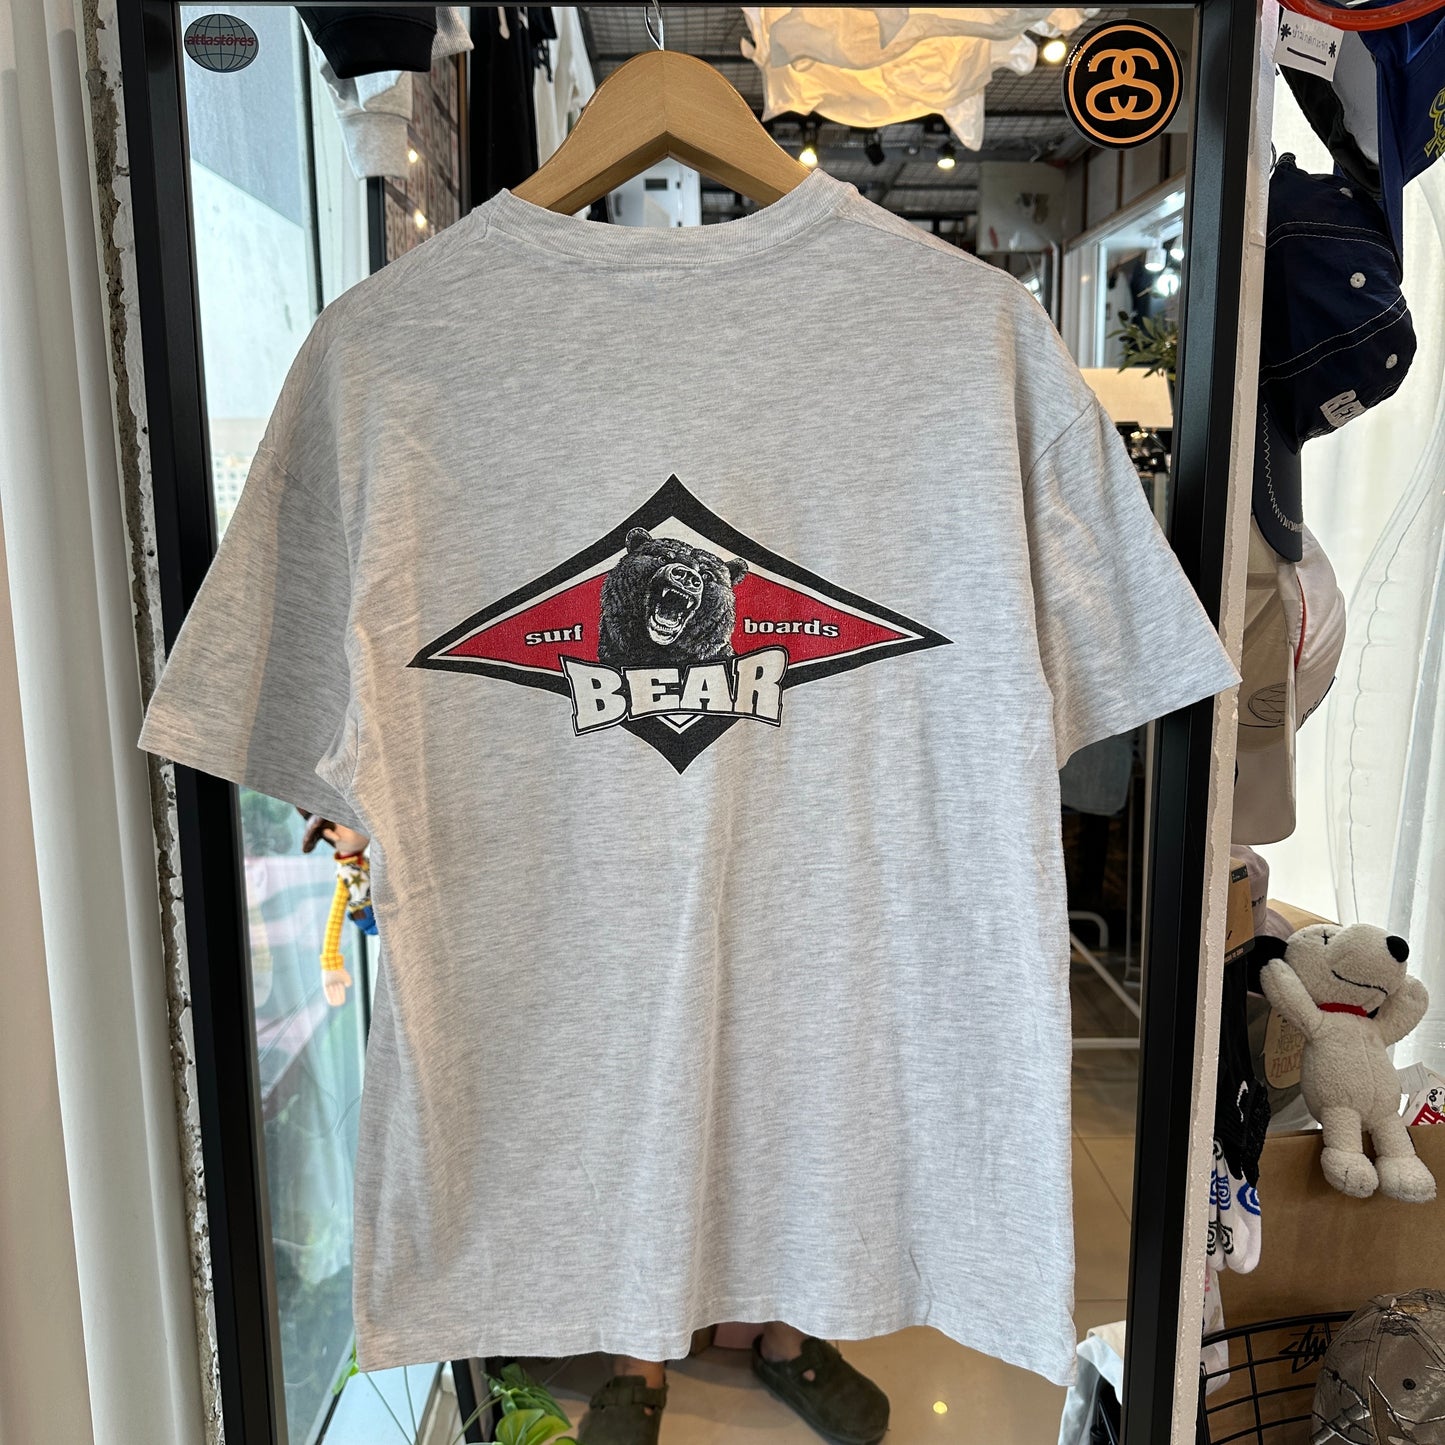 Vintage Bear Surfboards 90's made in USA T-shirt